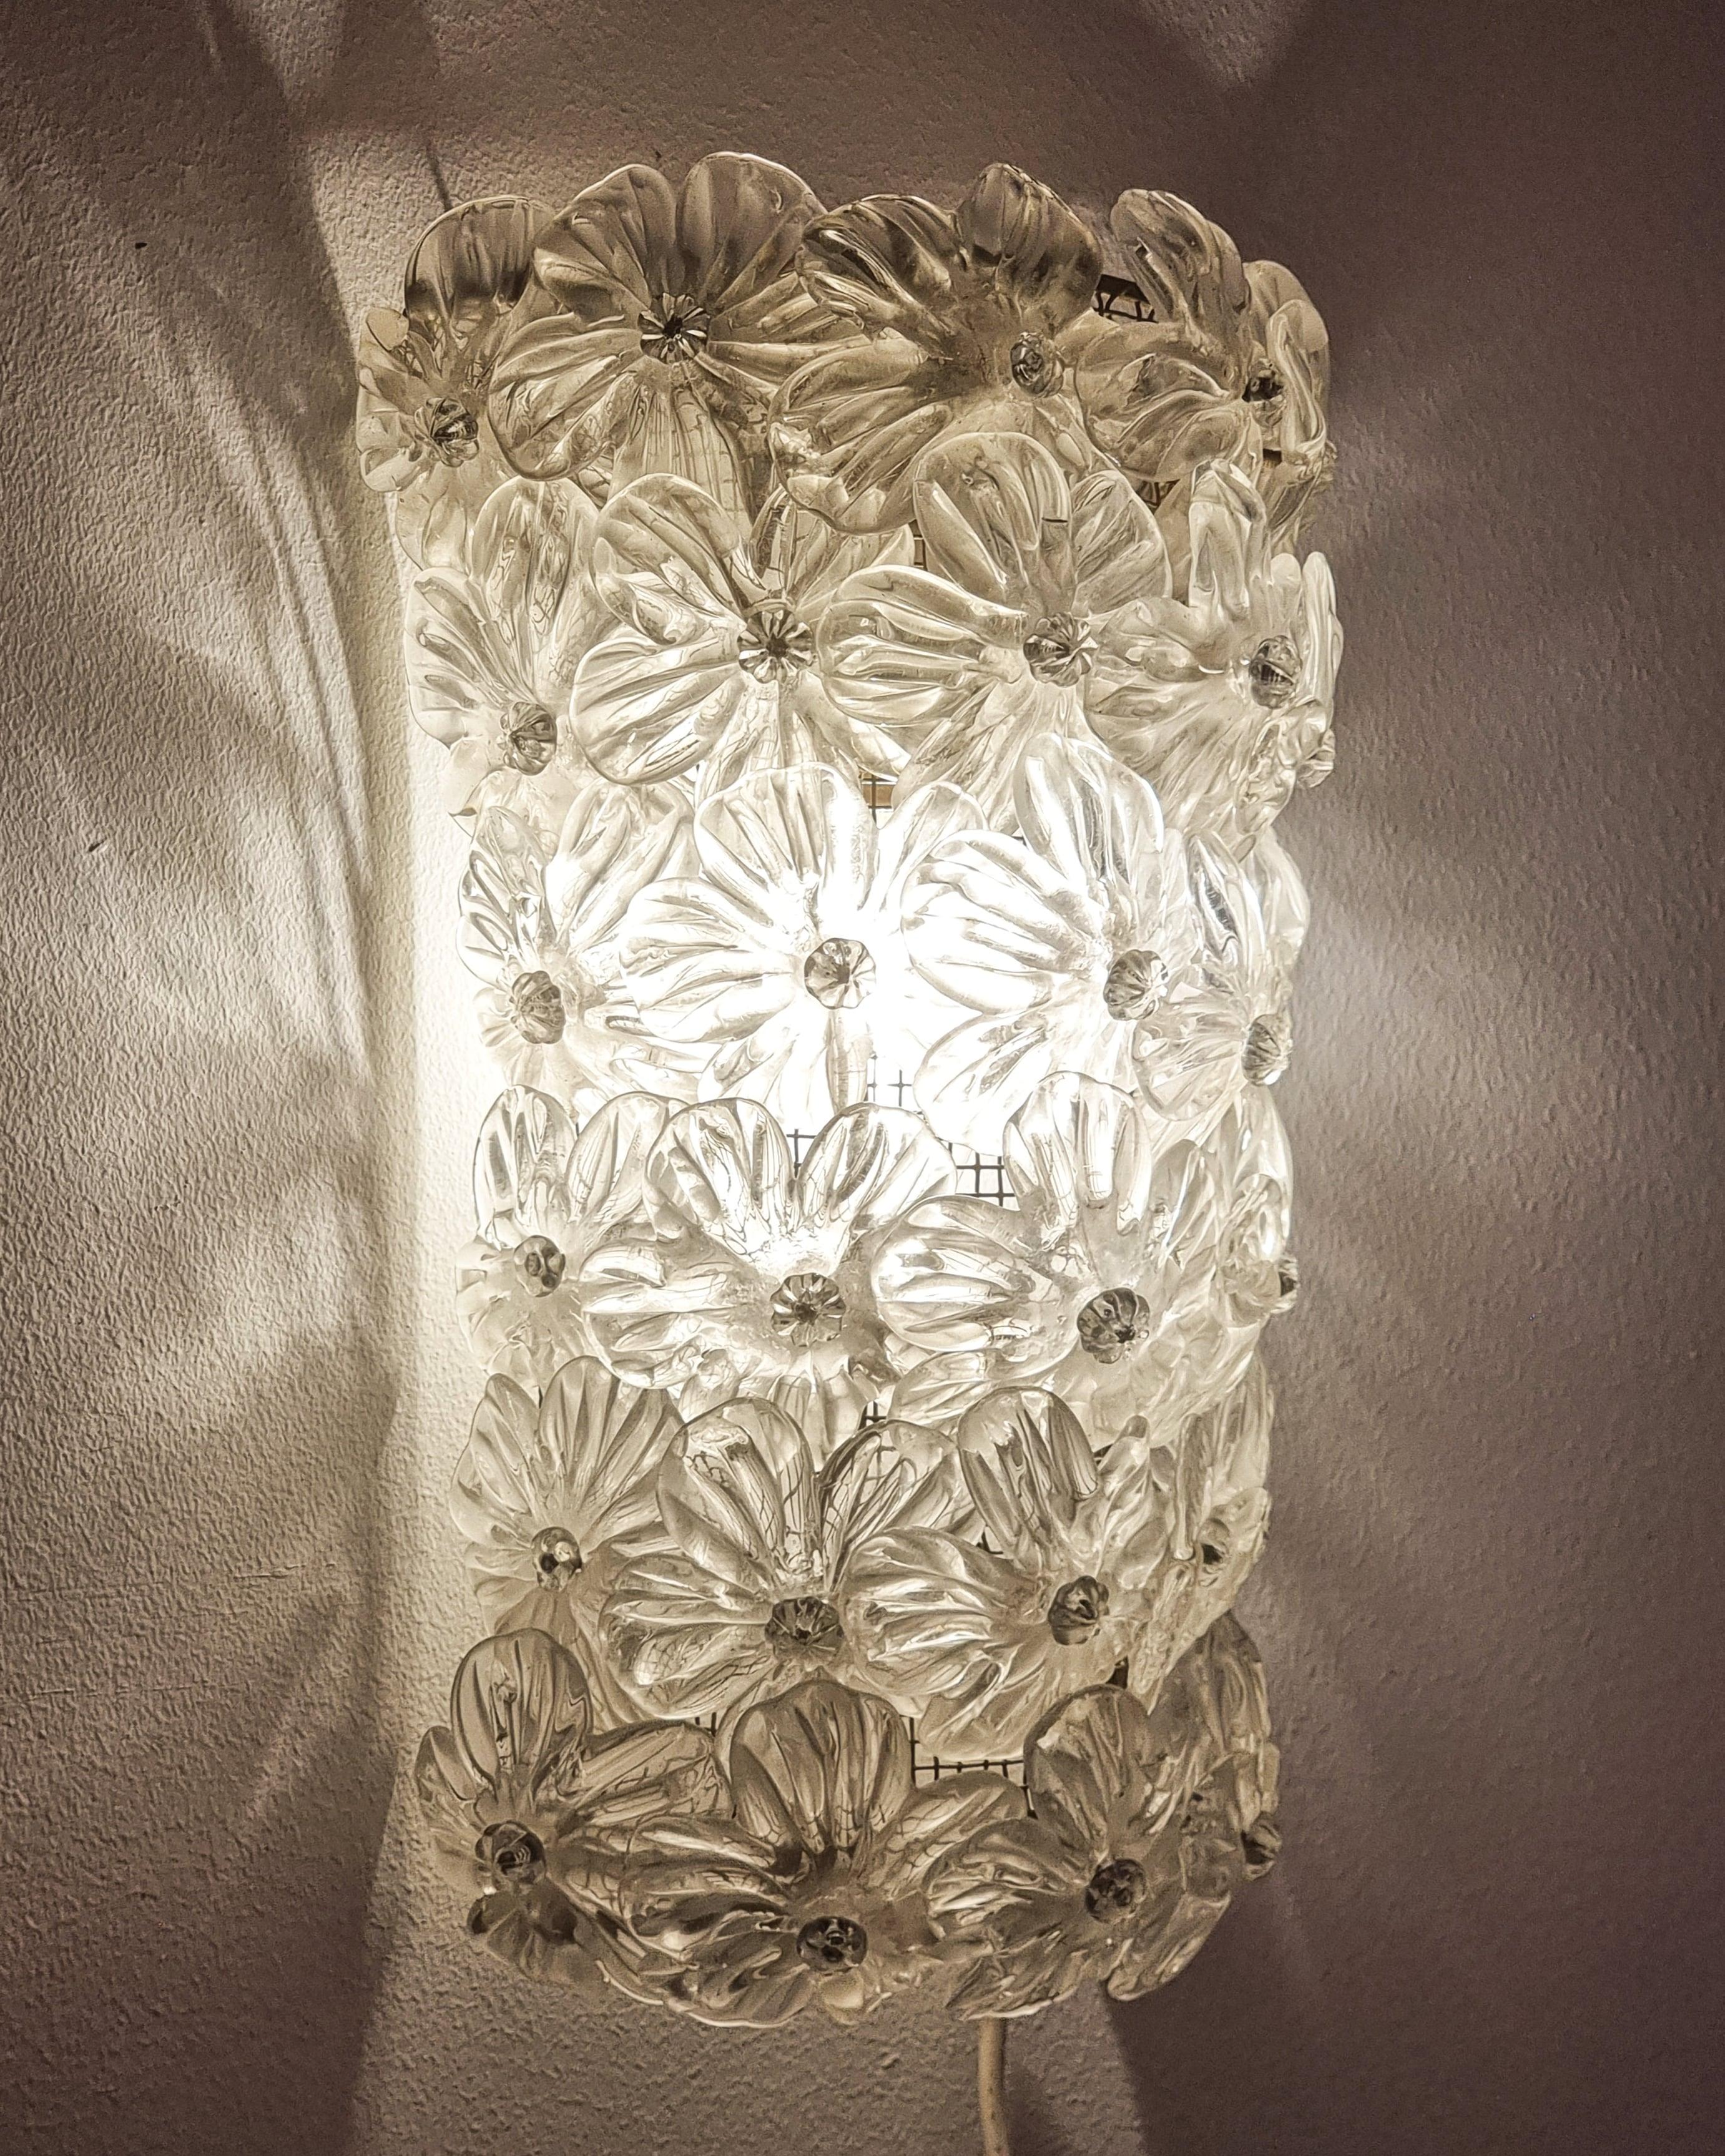 Italian Murano glass wall light with decor of flowers in glass, hold up by a metal net. Manufactured in the mid-1900s by Barovier & Toso.

Original wiring from the 50/60s, E14 light bulbs up to 40 watts. The lamp works but we recommend re-wiring